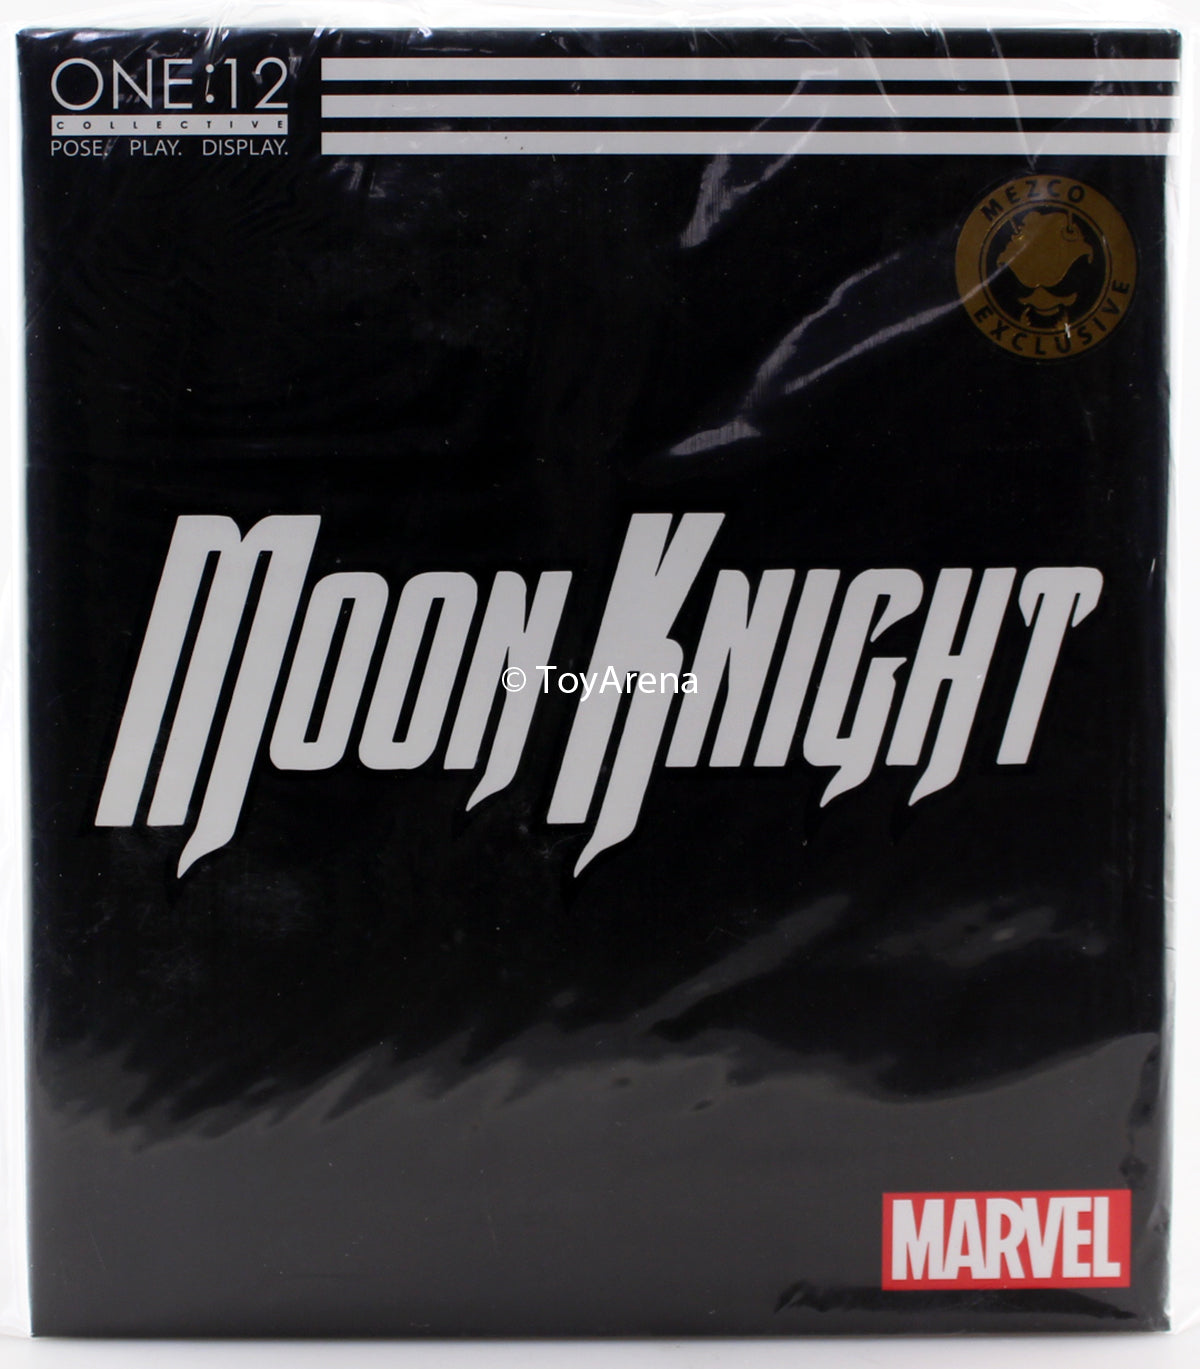 SDCC 2019 Mezco Toyz ONE:12 Moon Knight Crescent Edition Exclusive Action Figure